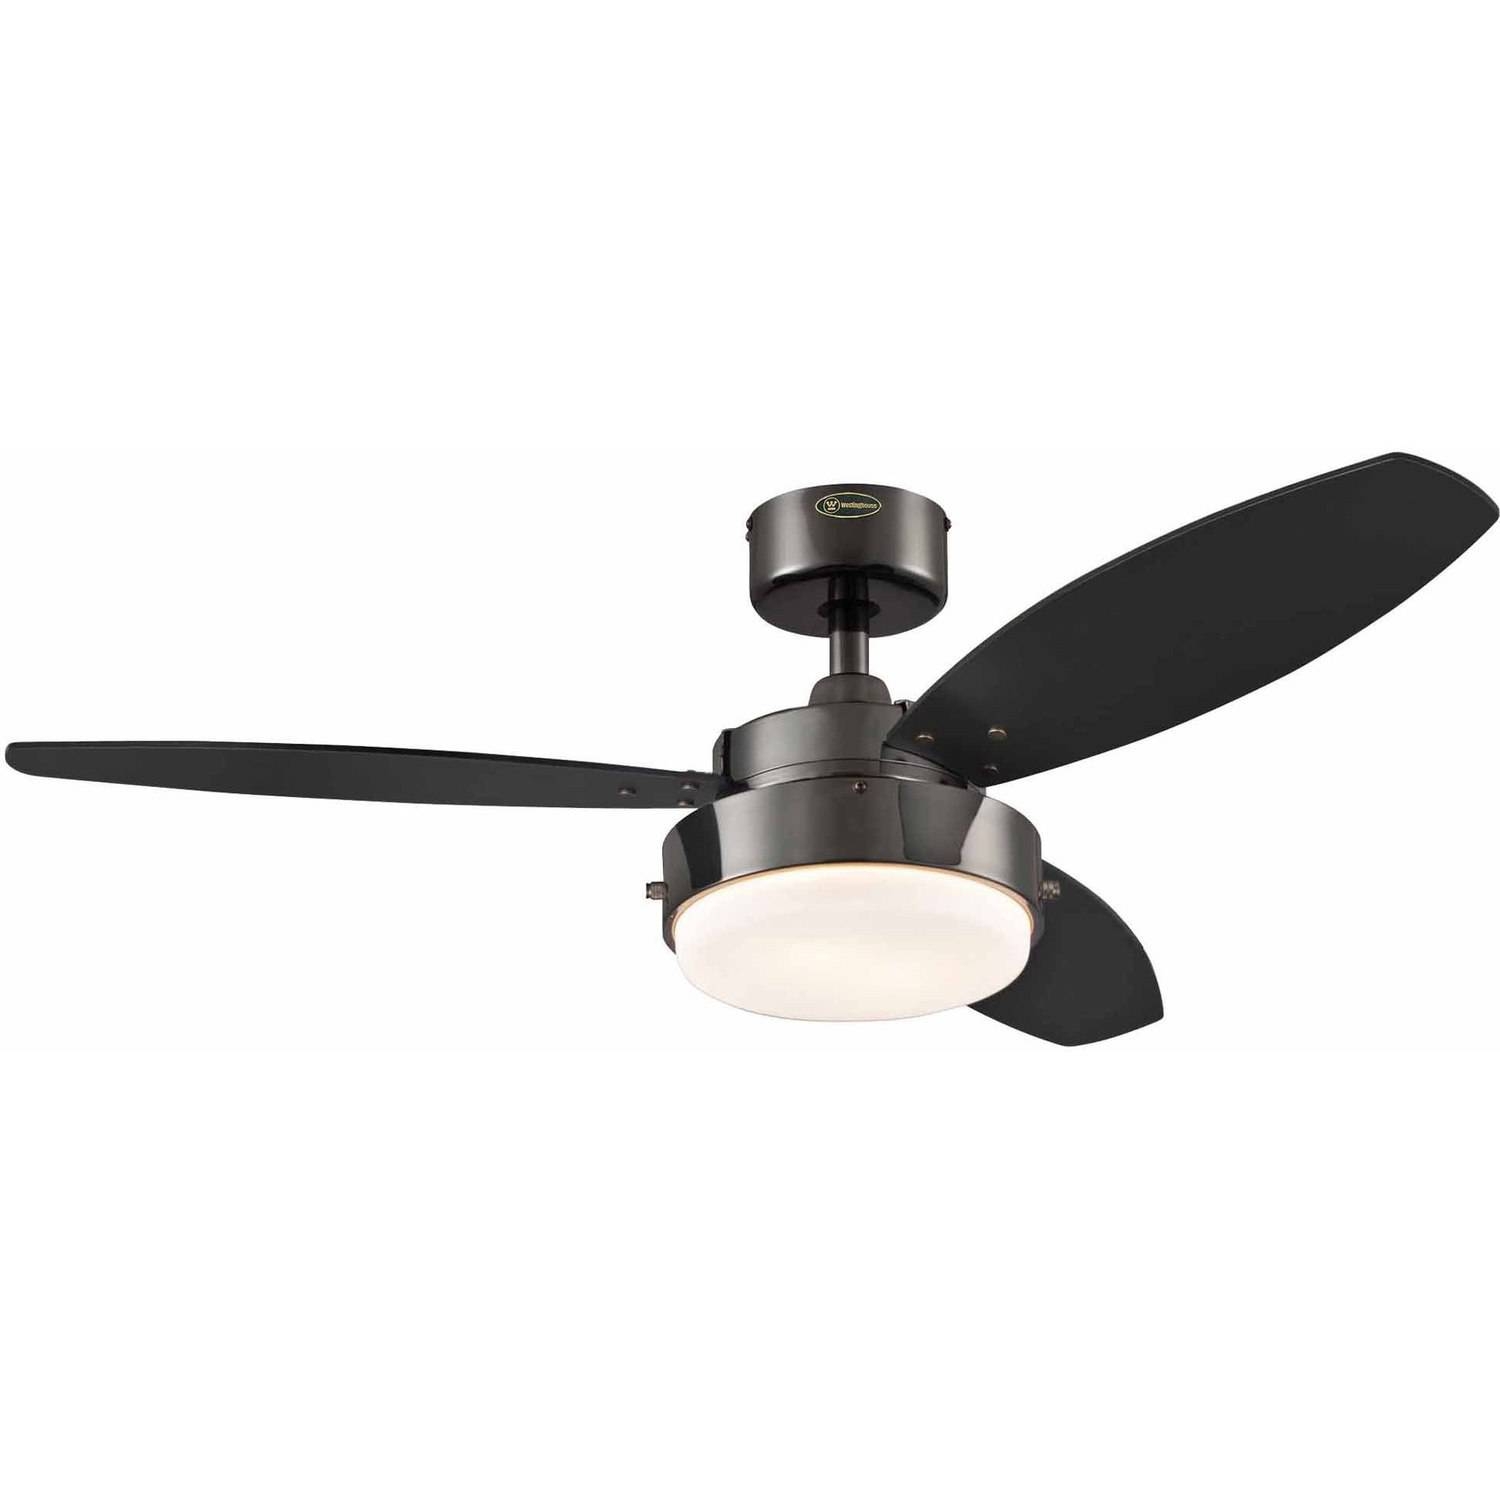 Permalink to 42 Ceiling Fan With Light And Remote